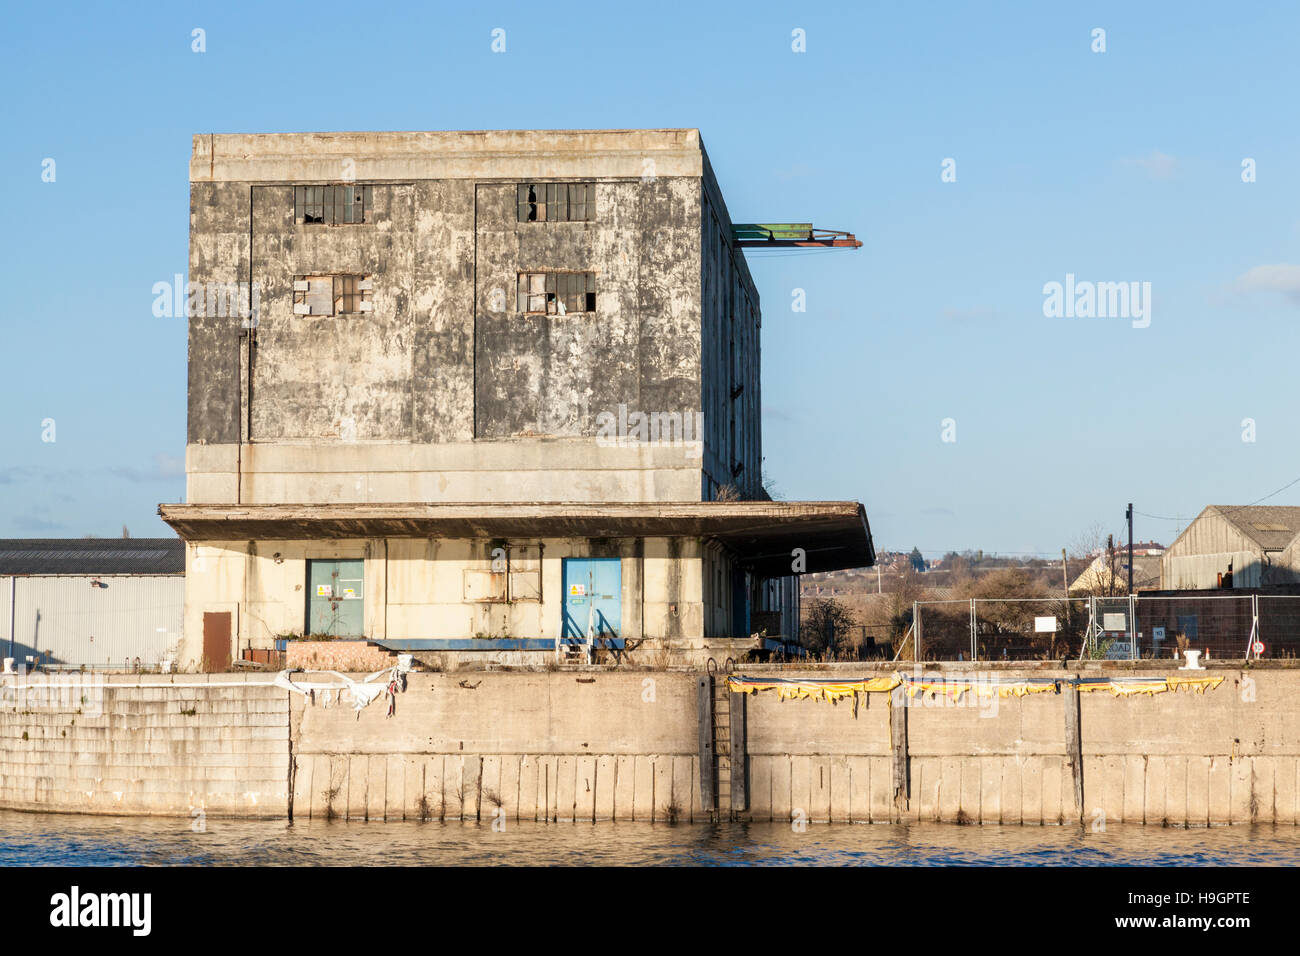 Old industrial building. A 1930s warehouse which was part of the Trent Lane Depot inland port on the River Trent, Nottingham, England, UK Stock Photo